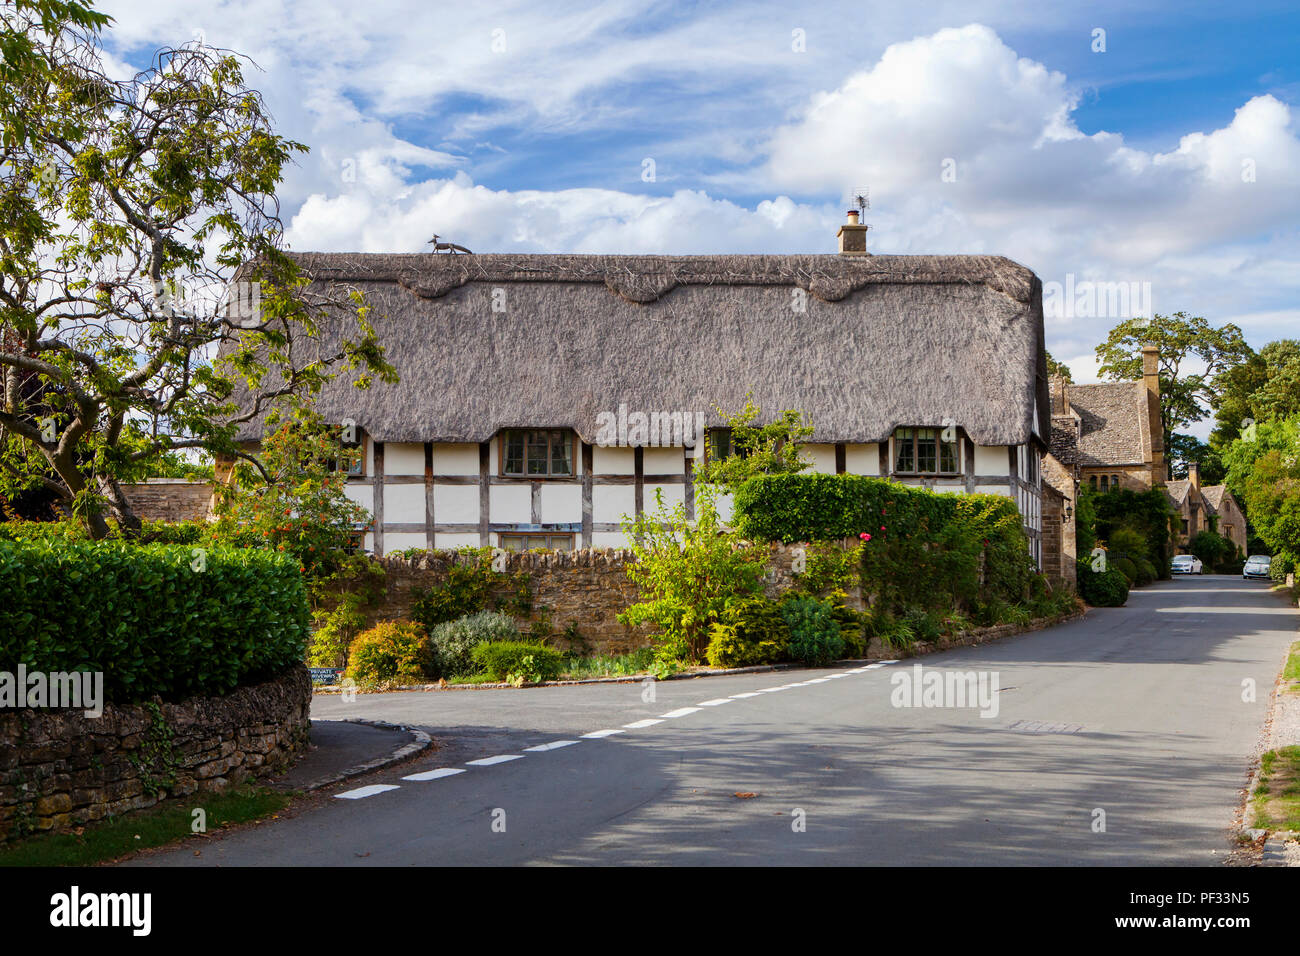 Stanton, UK - 8th August 2018: Stanton is a village in the Cotswold district of Gloucestershire and is built almost completely of Cotswold stone, Stock Photo